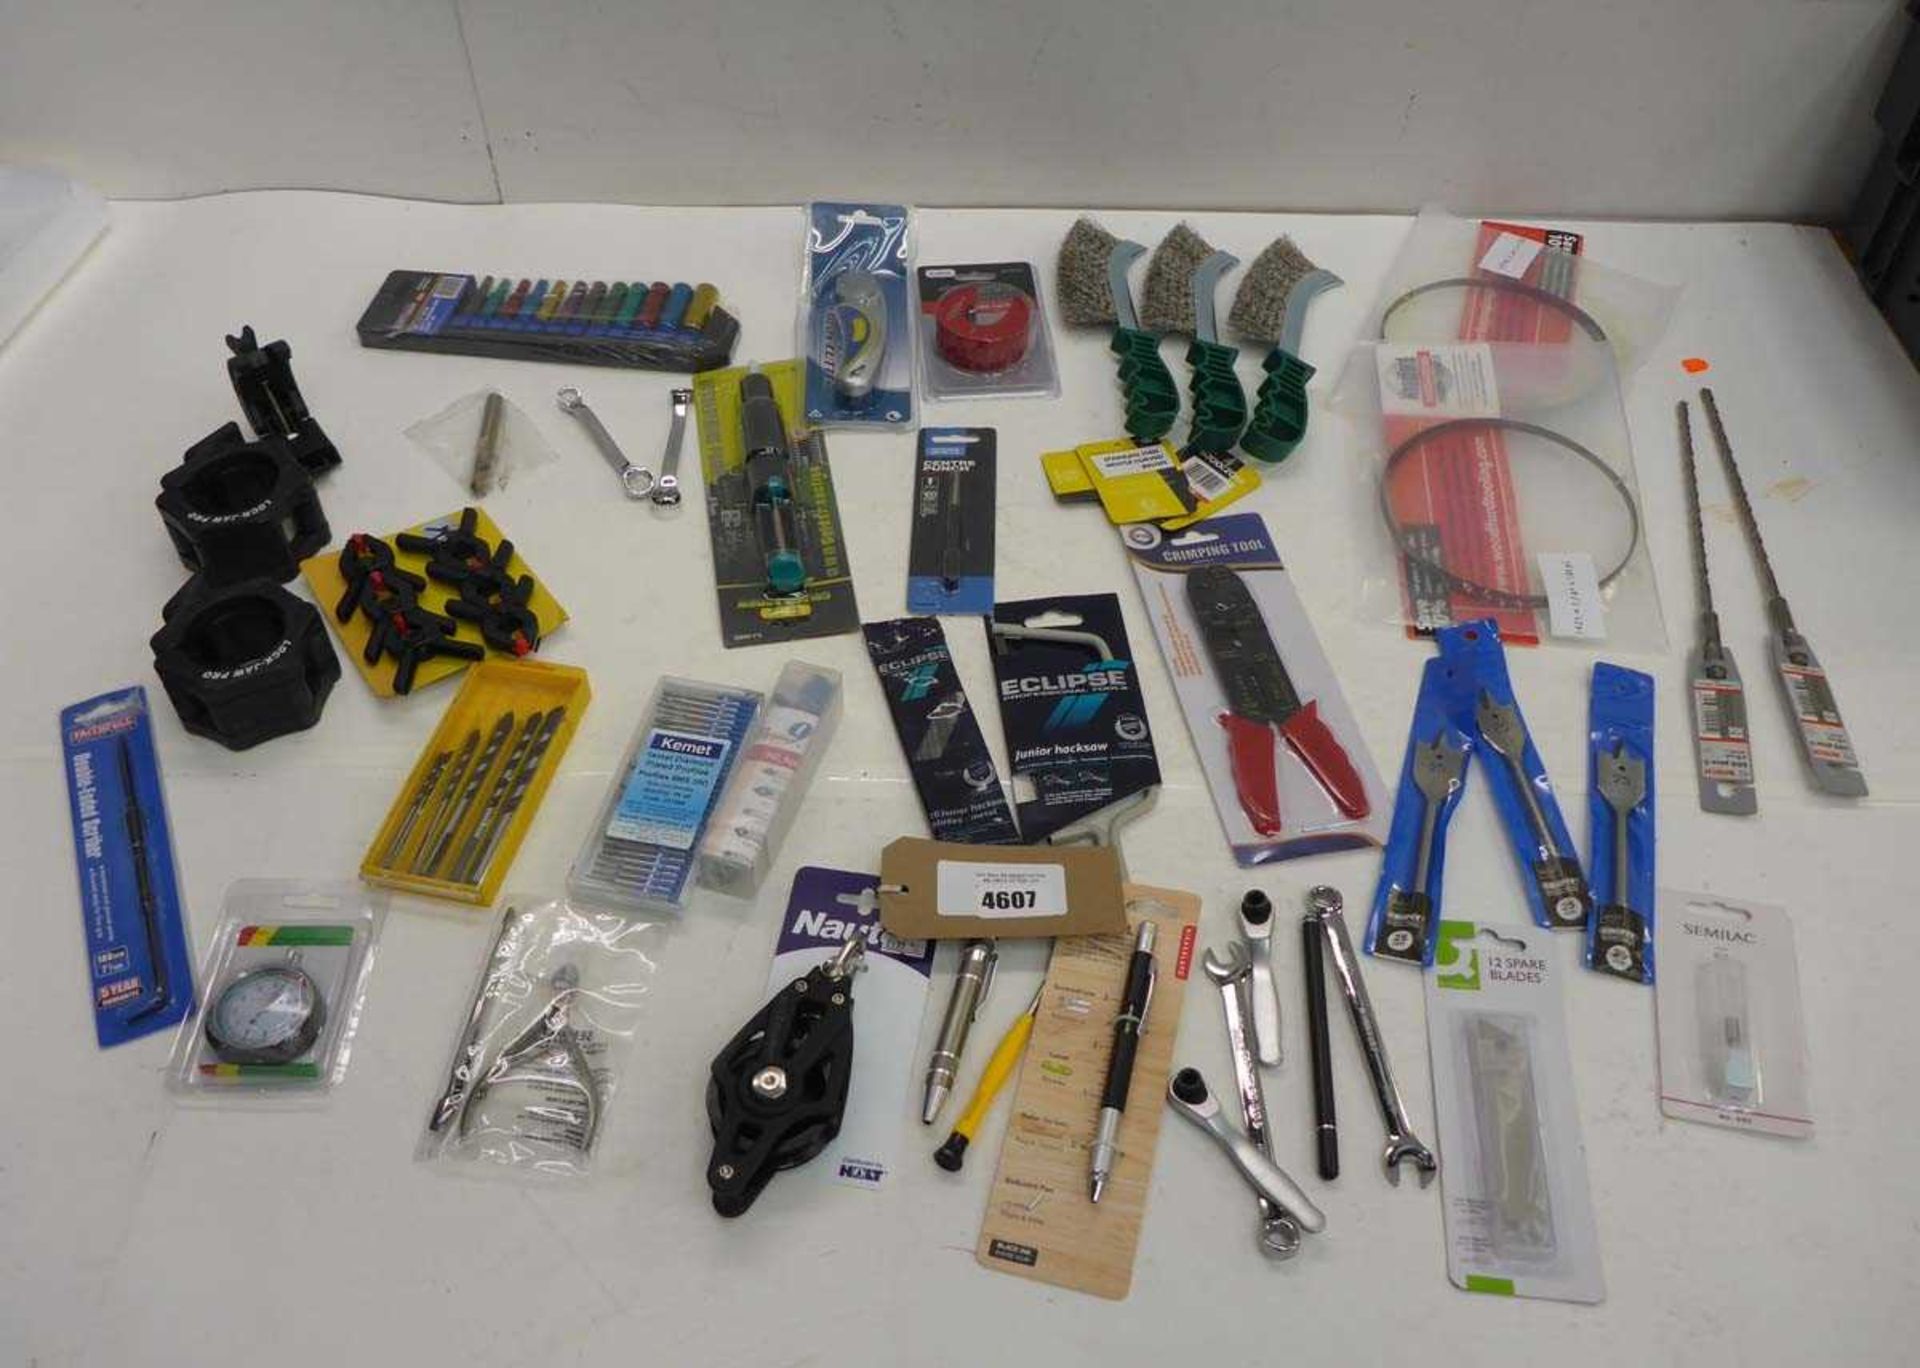 +VAT Wire brushes, spanners, crimping tool, clamps, drill bits, de-soldering pump, utility knife,